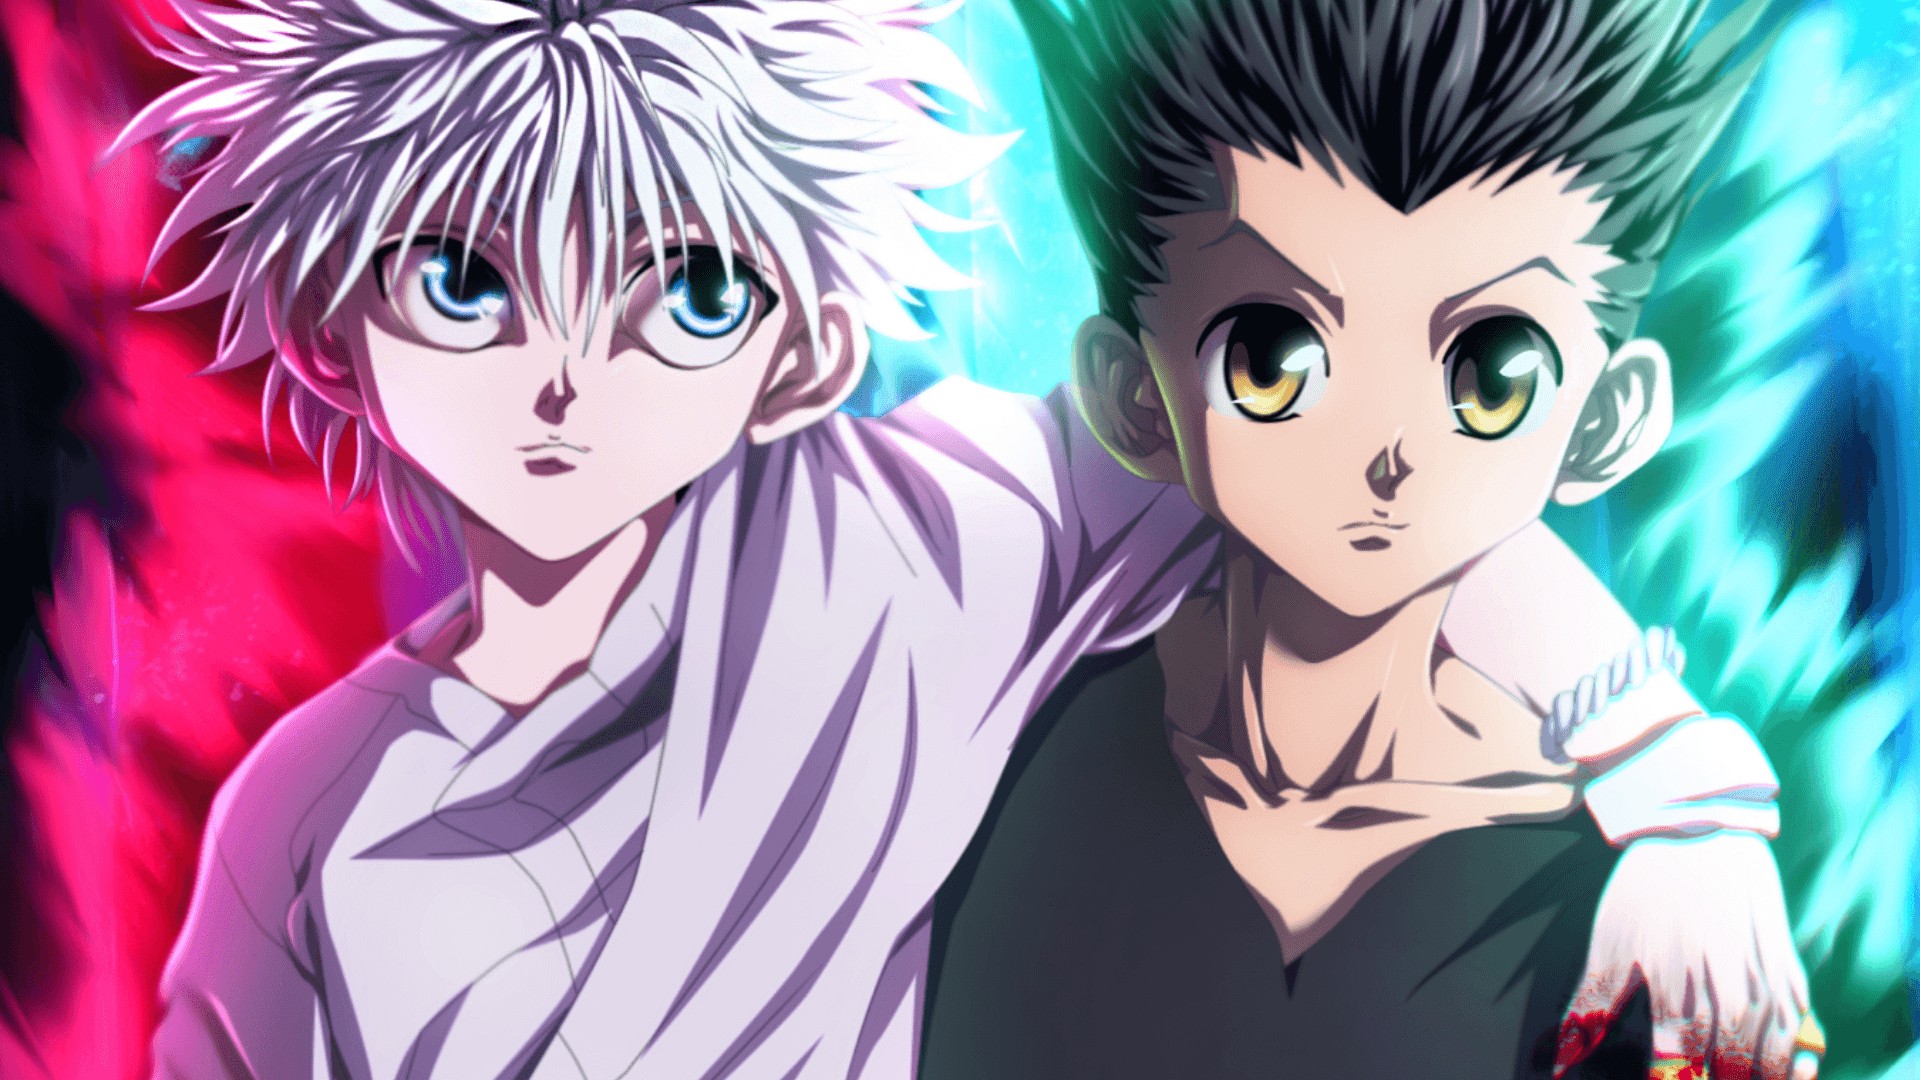 Wallpaper Gon And Killua HD With high-resolution 1920X1080 pixel. You can use this wallpaper for your Desktop Computer Backgrounds, Mac Wallpapers, Android Lock screen or iPhone Screensavers and another smartphone device